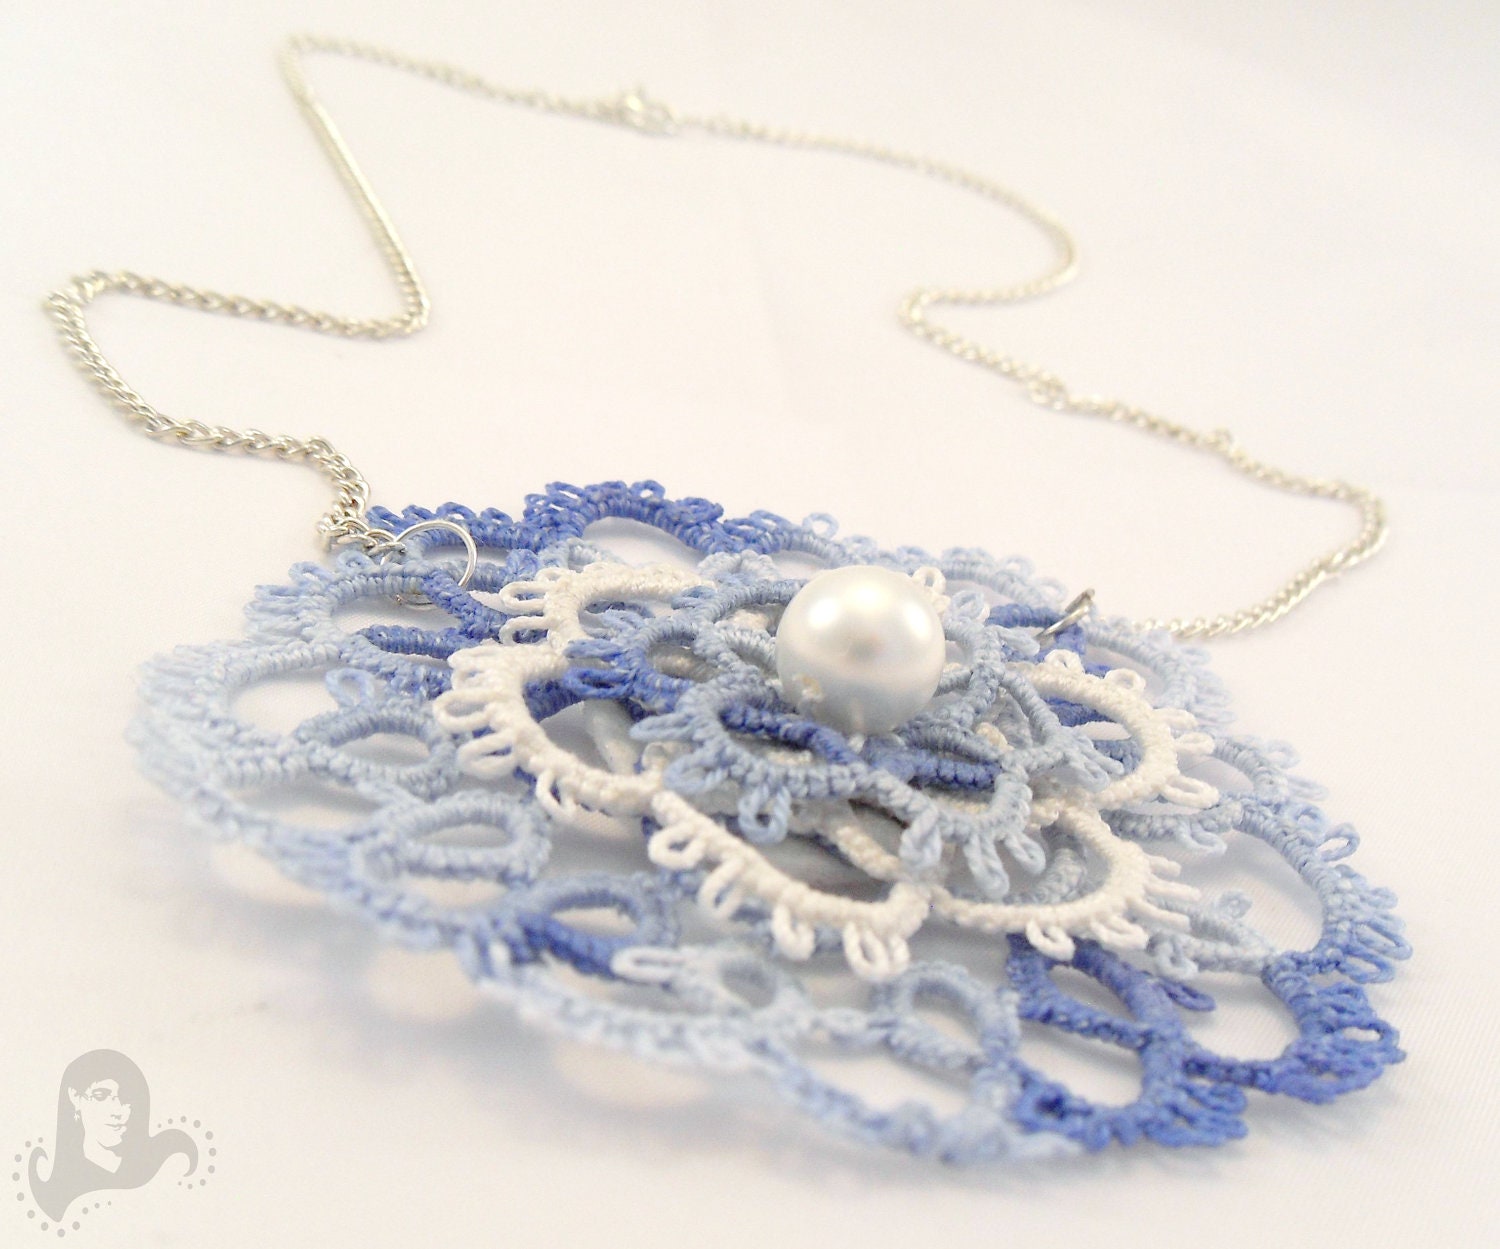 Tatting blue and white medallion necklace - Cloudy Sky - Tatted necklace, lace medallion on a chain - MadeByRevi